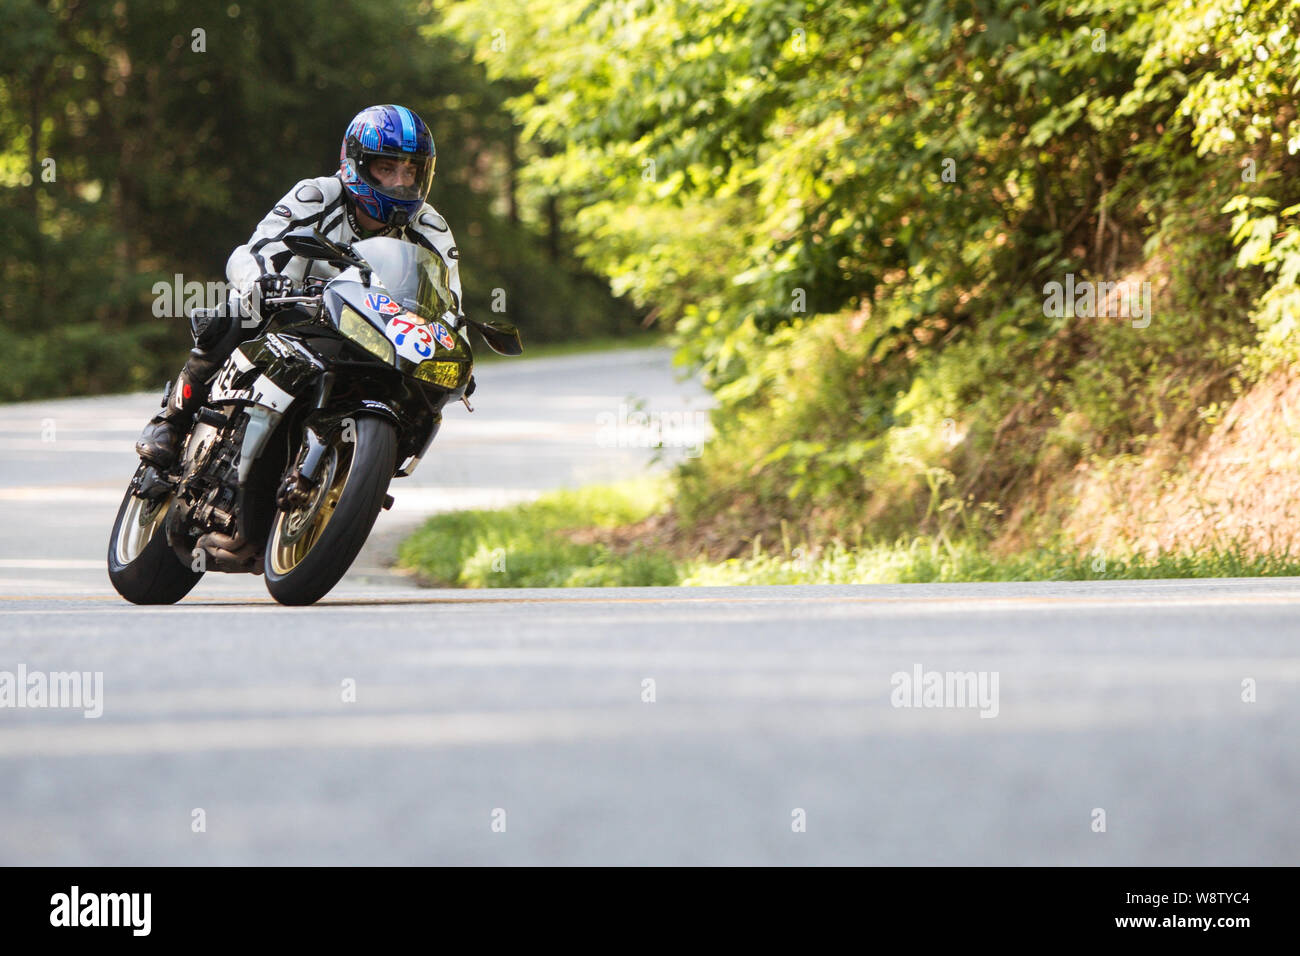 A man riding a motorcycle leans into a turn at a high rate of speed, as he traverses windy roads on a weekend ride on June 9, 2018 in Blairsville, GA. Stock Photo